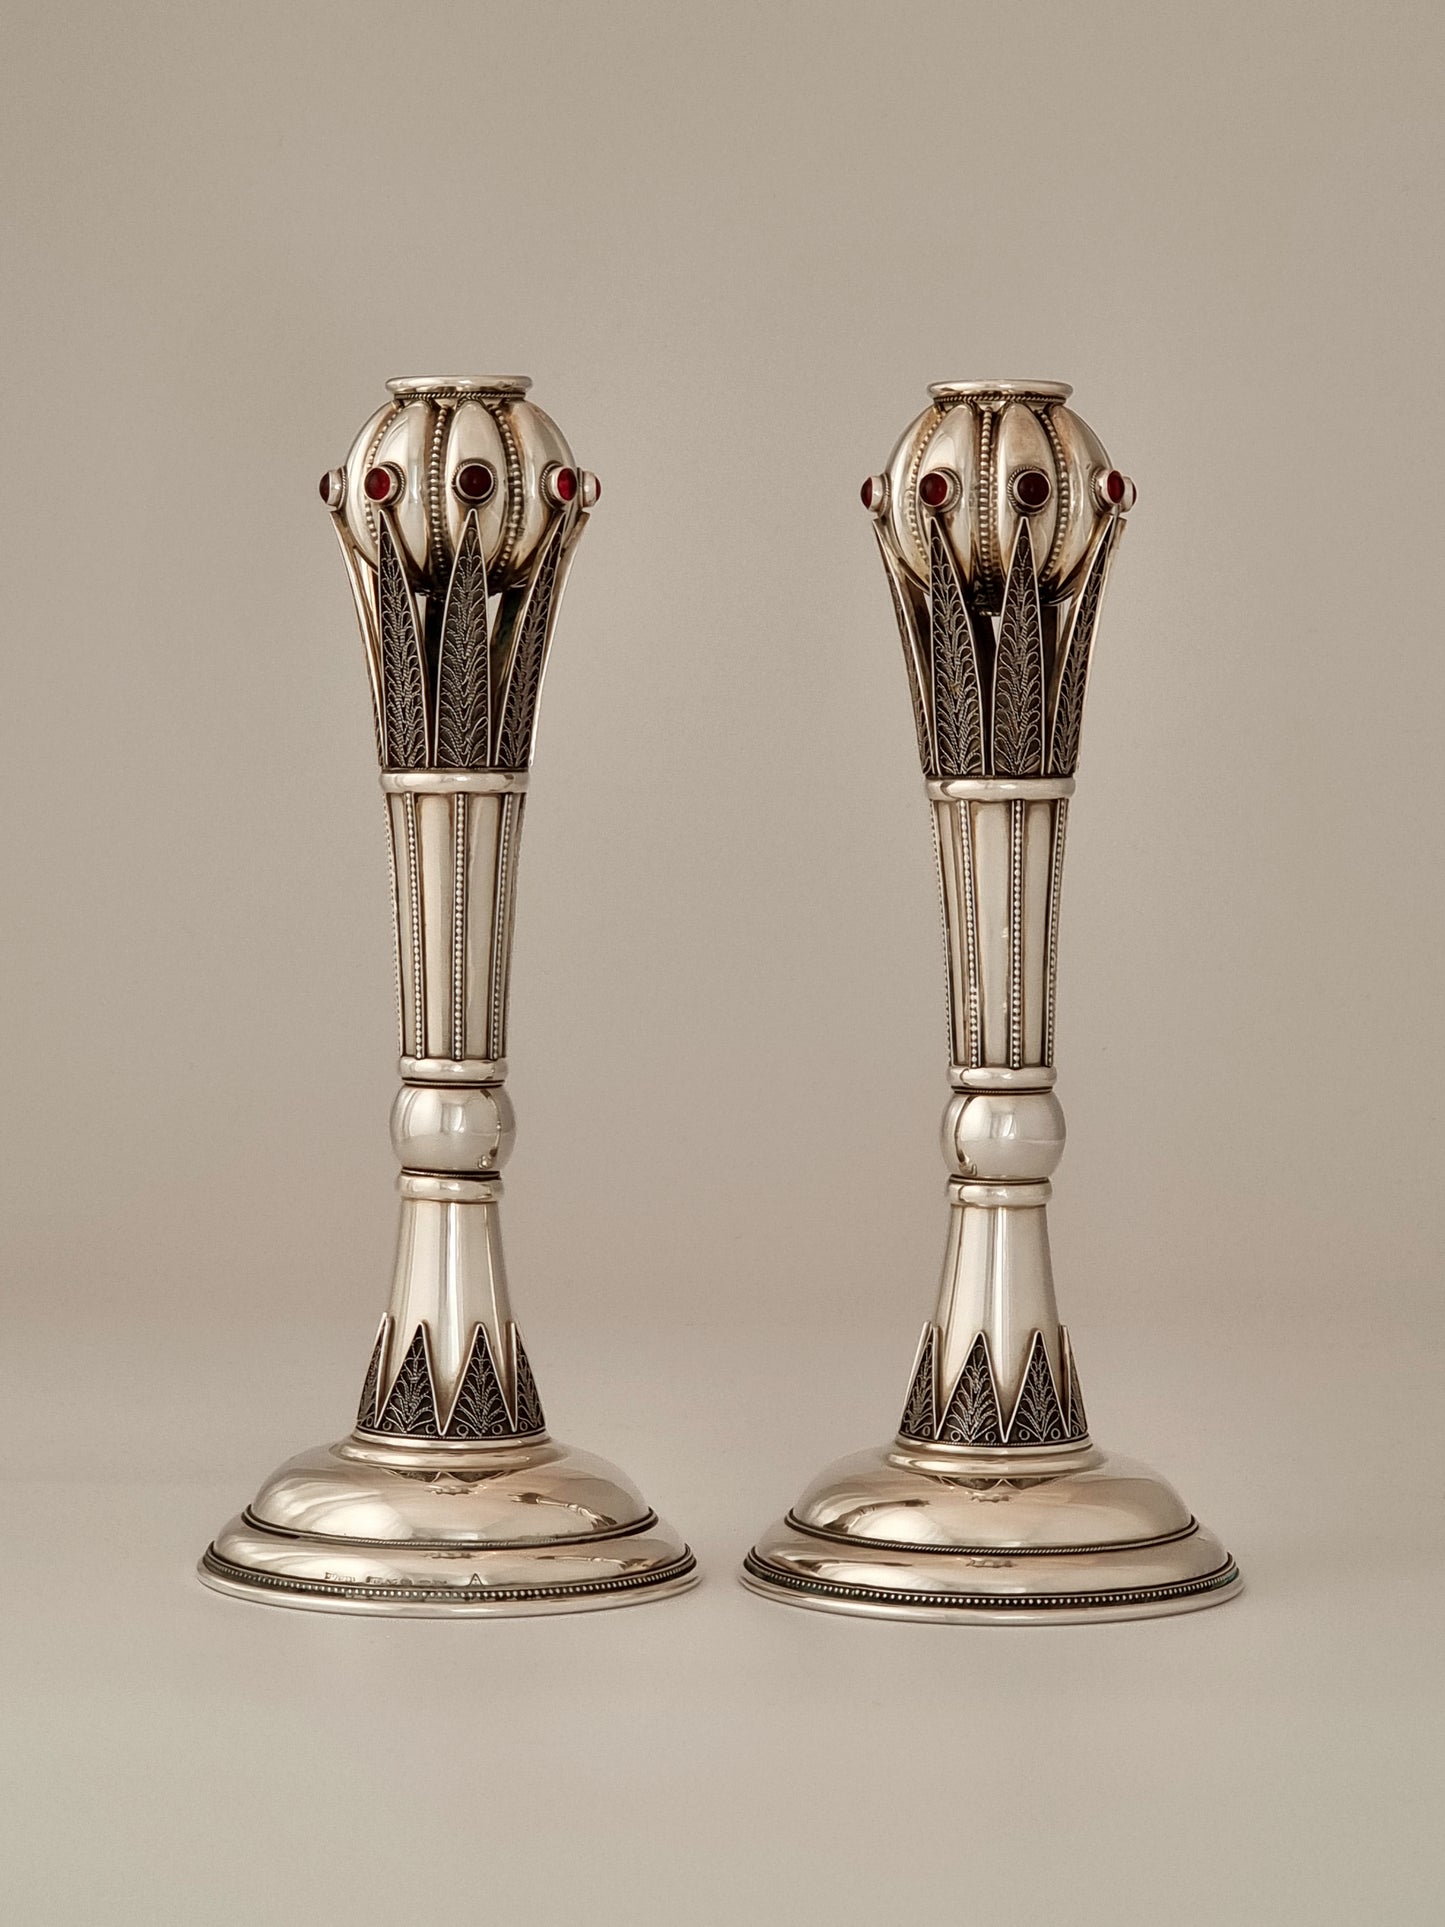 Jacob Candlesticks. These candlesticks were designed in 1998 and made of sterling silver and garnets, seven stones per stick. They are 10” high.